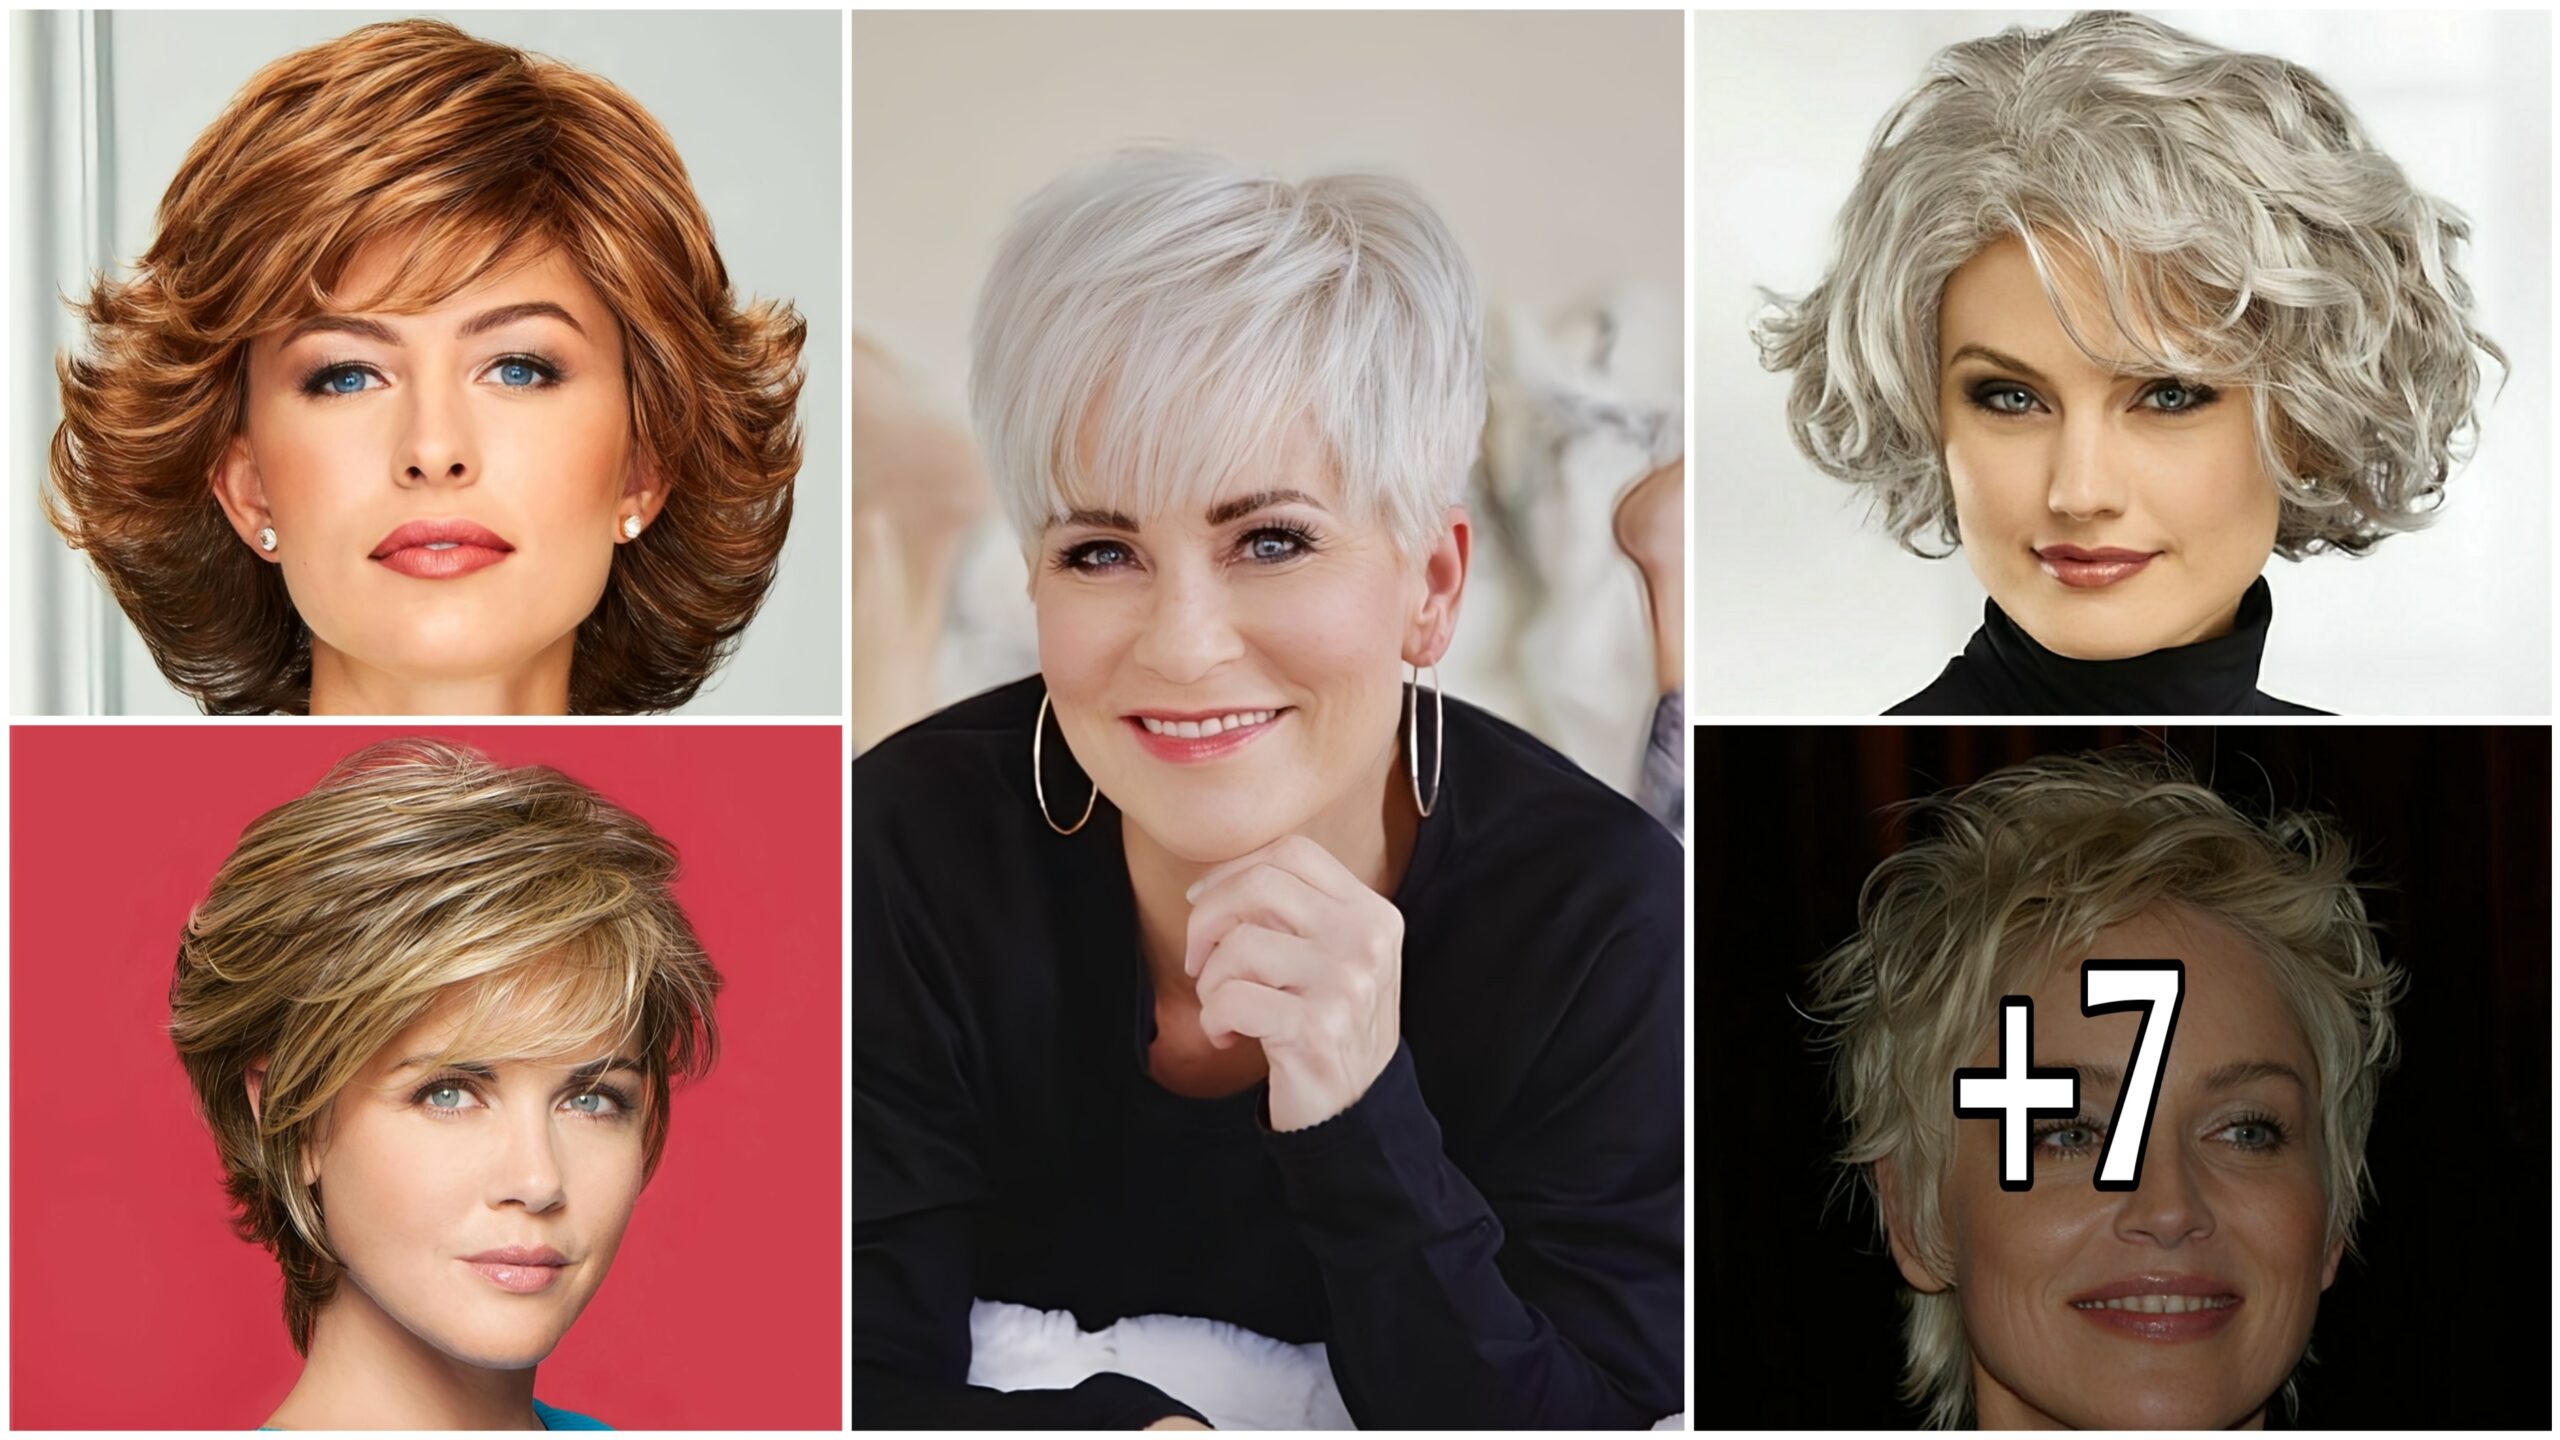 +10 Inspiring Hairstyles for Mature Women: Age is Just a Number